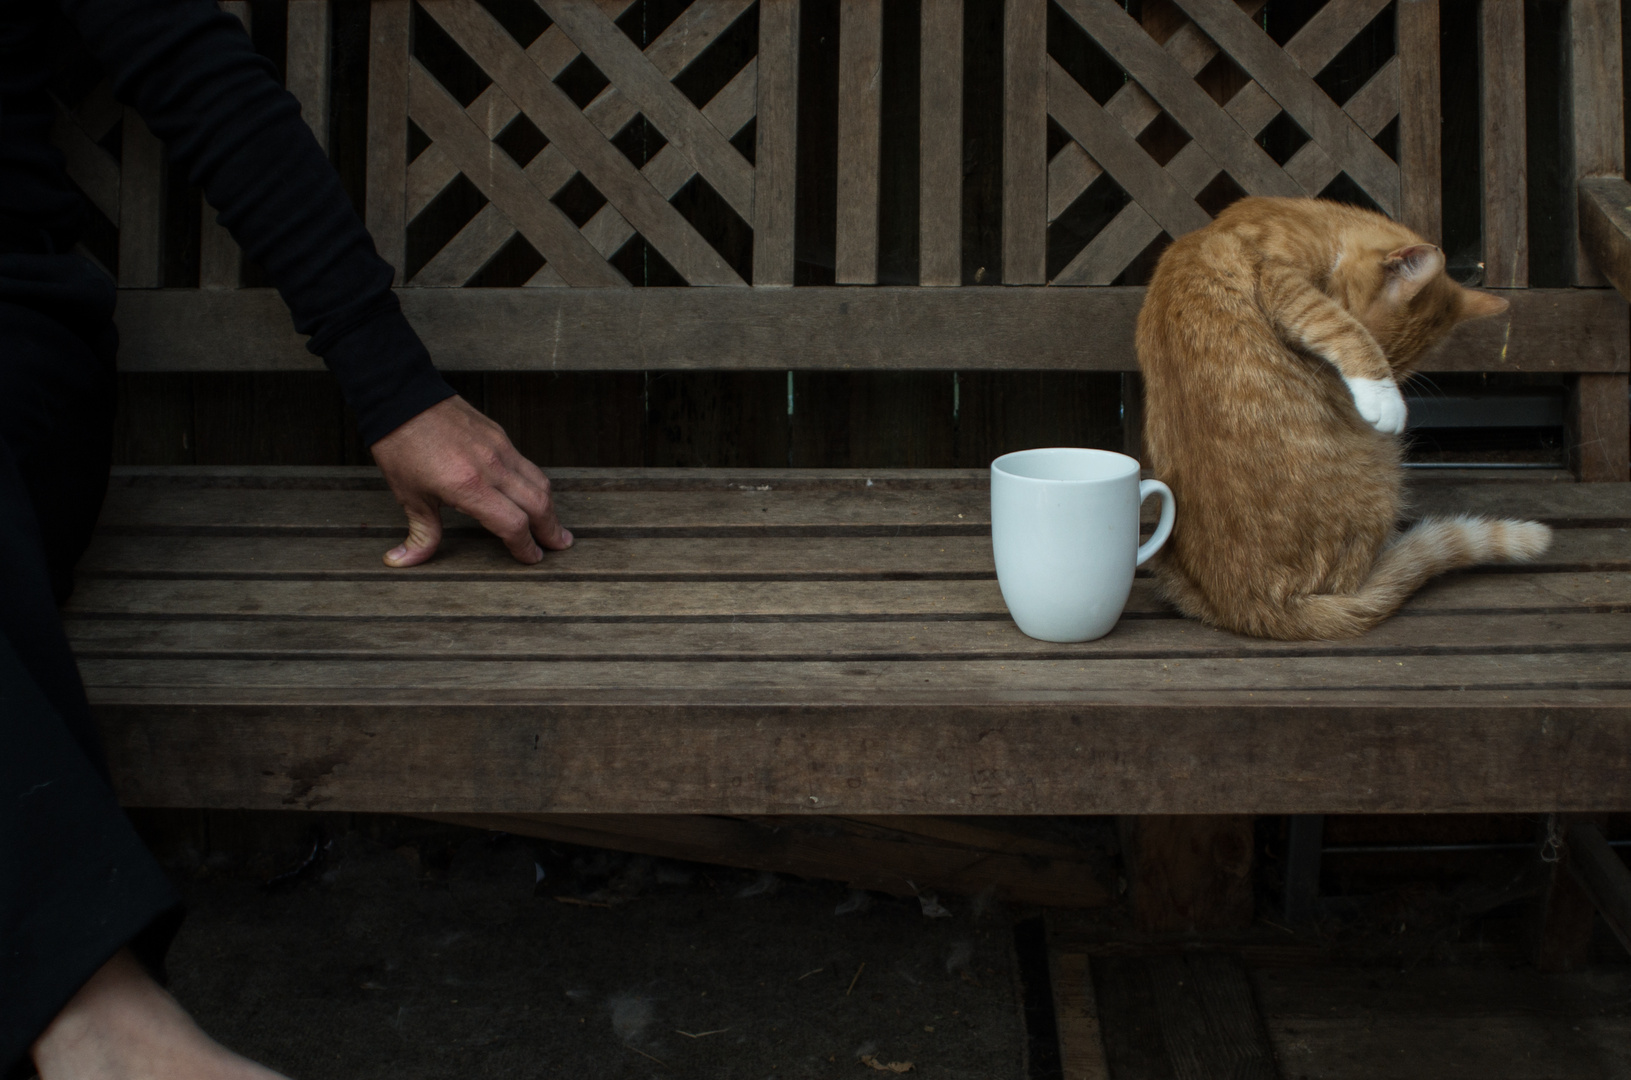 a hand, a cup and a cat